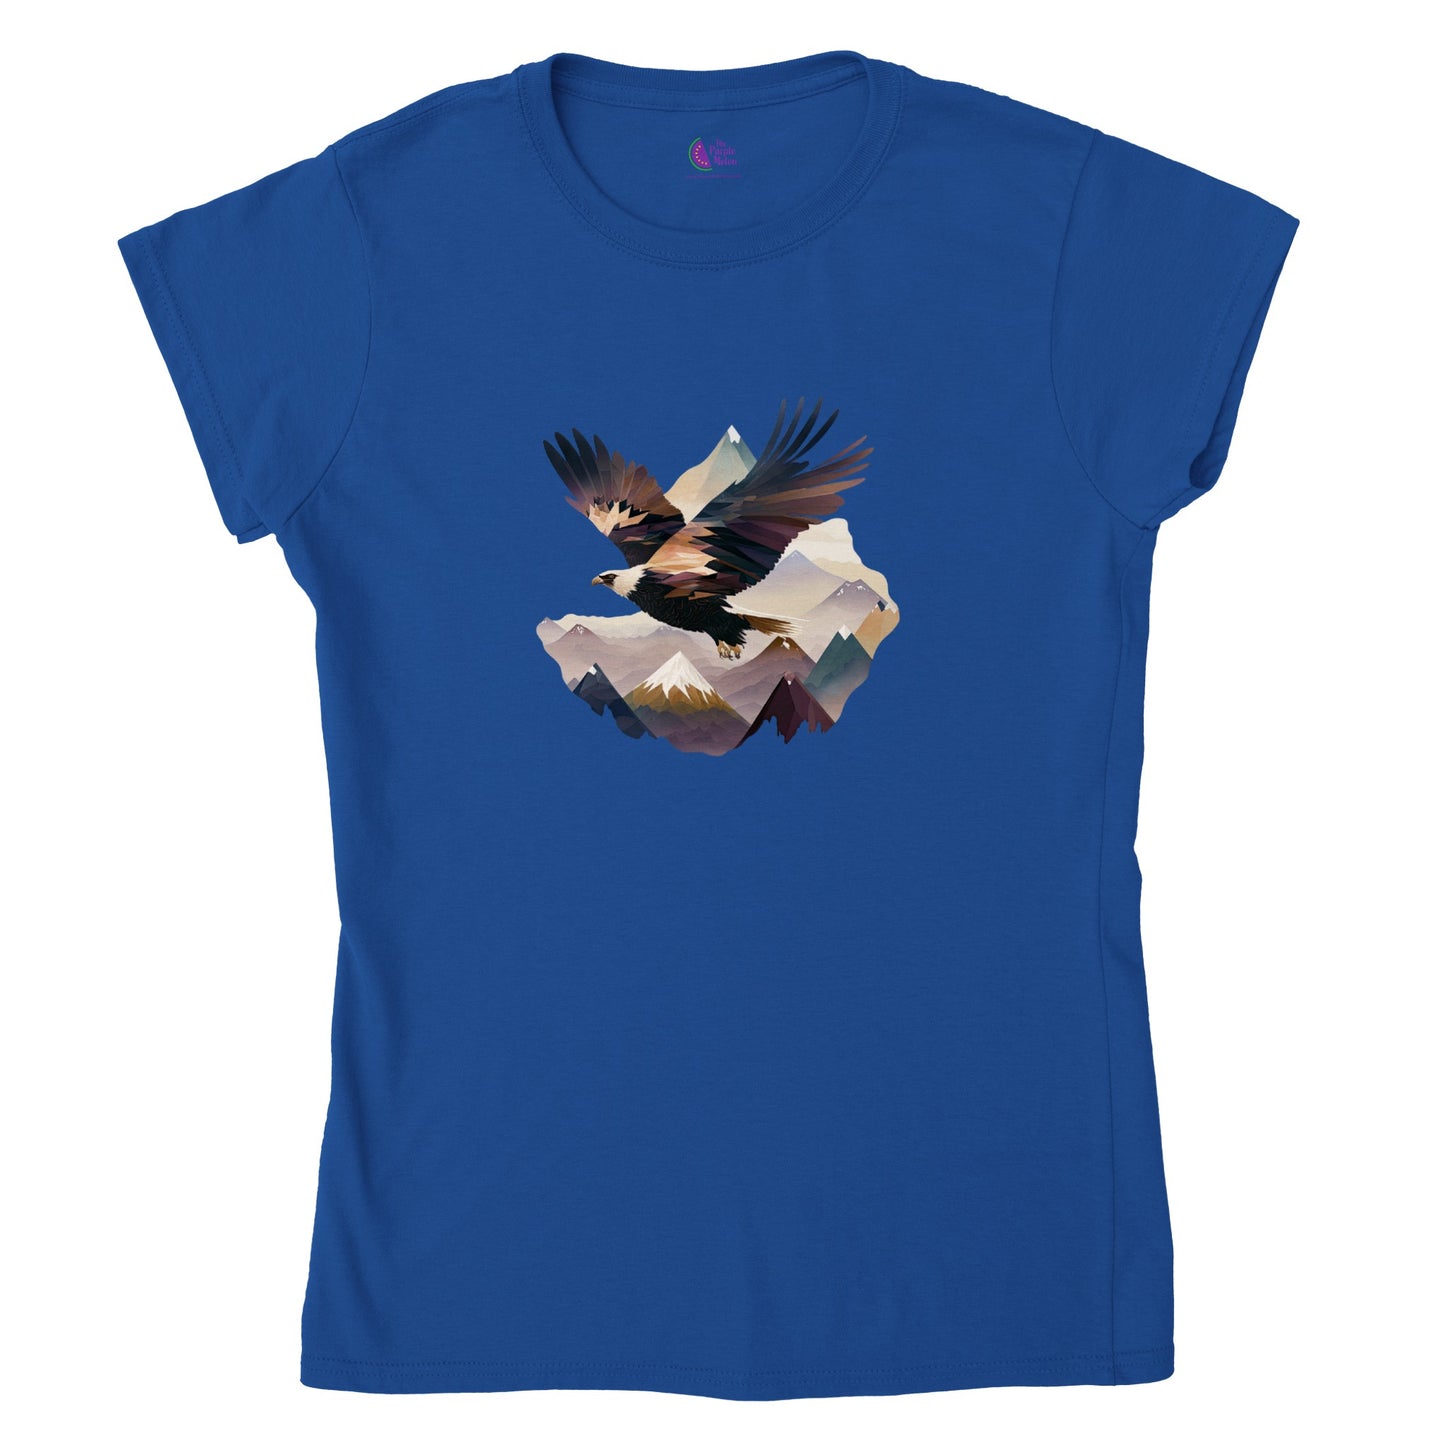 Blue t-shirt with an eagle flying over a mountain range print